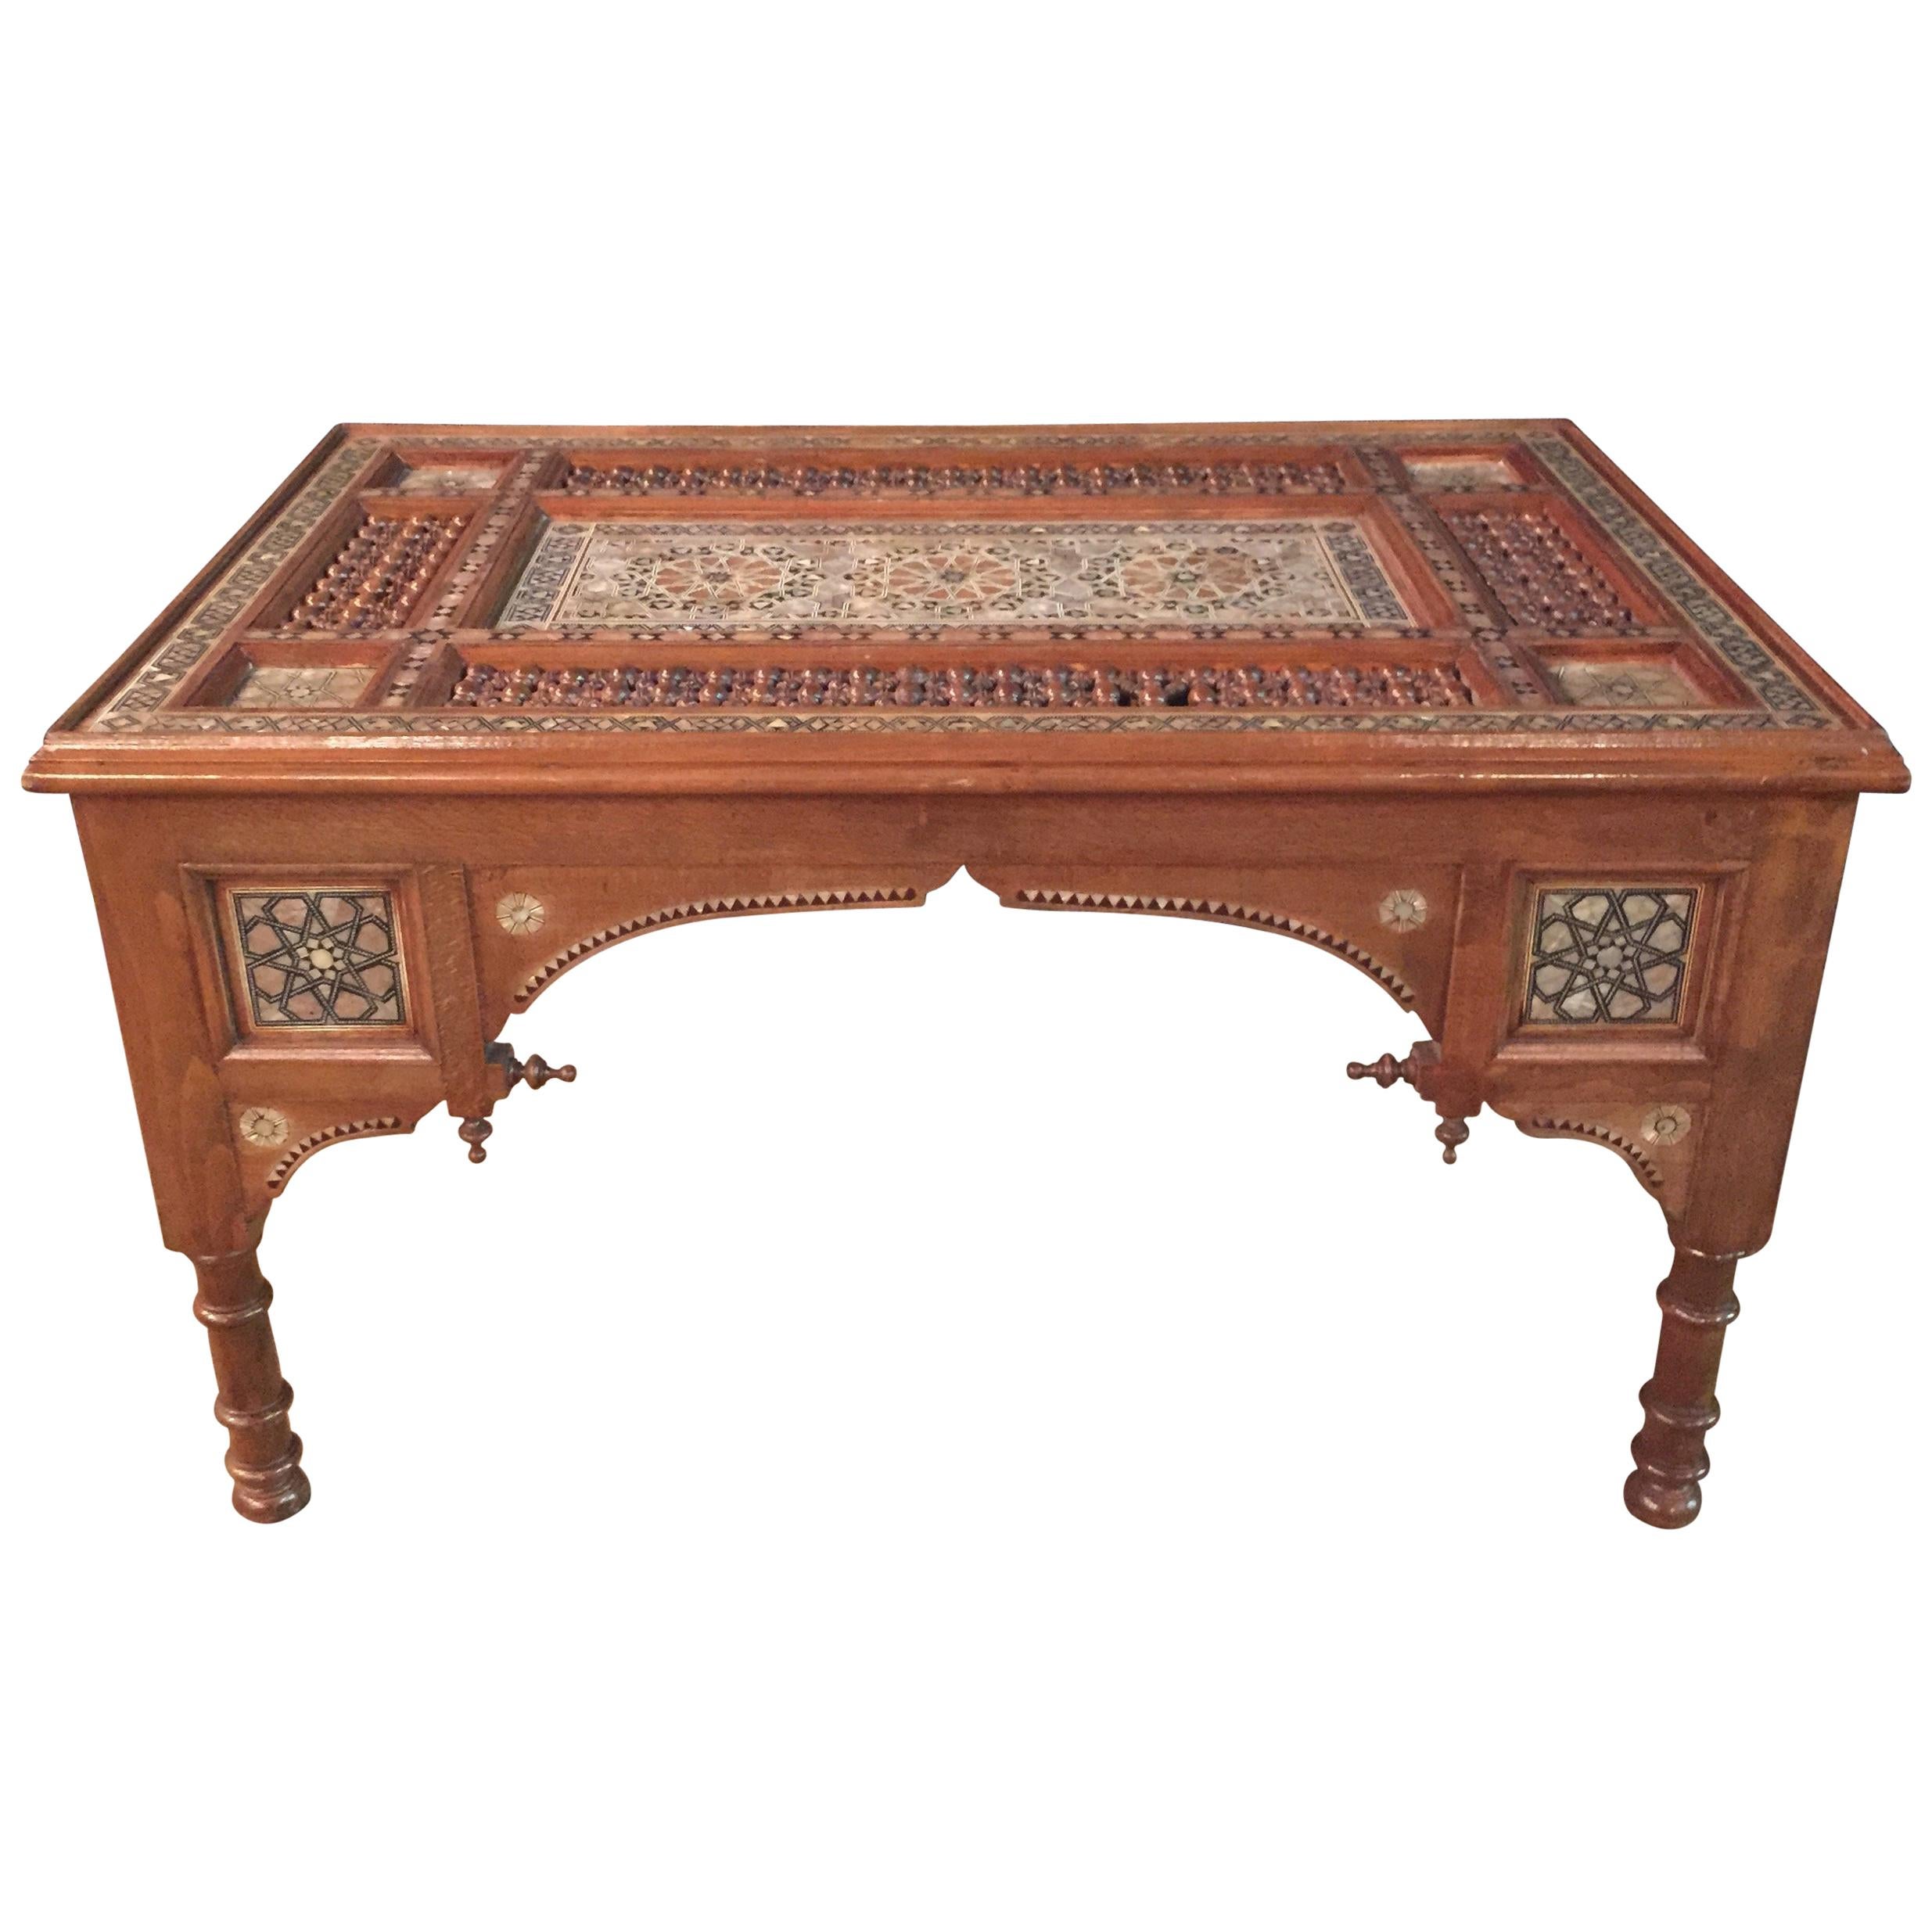 Antique Oriental Coffee Table, Inlaid with Finest Mother of Pearl